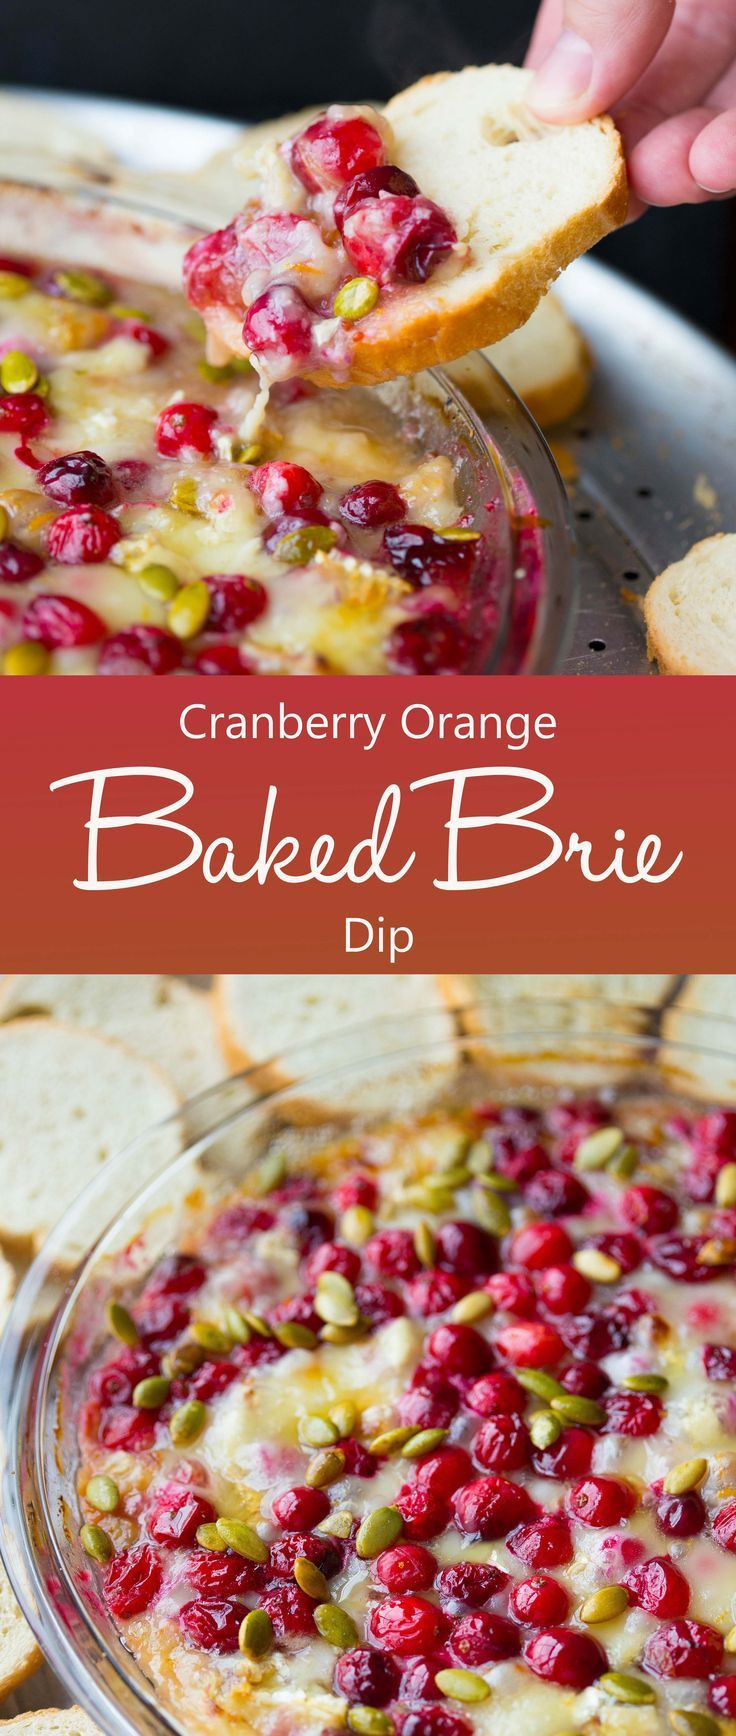 Fun Christmas Appetizers
 Cranberry orange baked brie dip is a super easy fun and